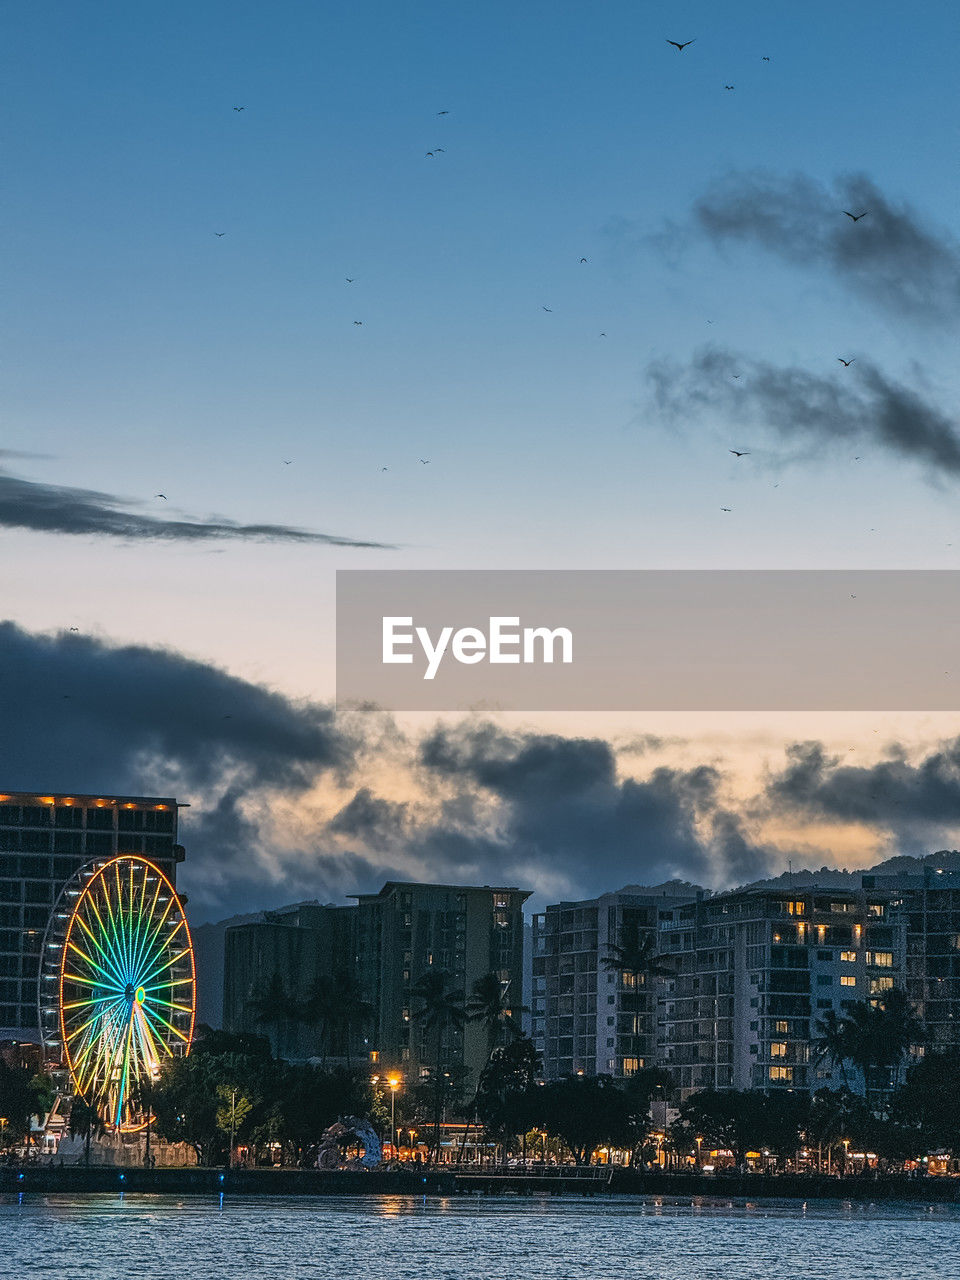 A city skyline with a ferris wheel in the background. the sky is cloudy and the sun is setting